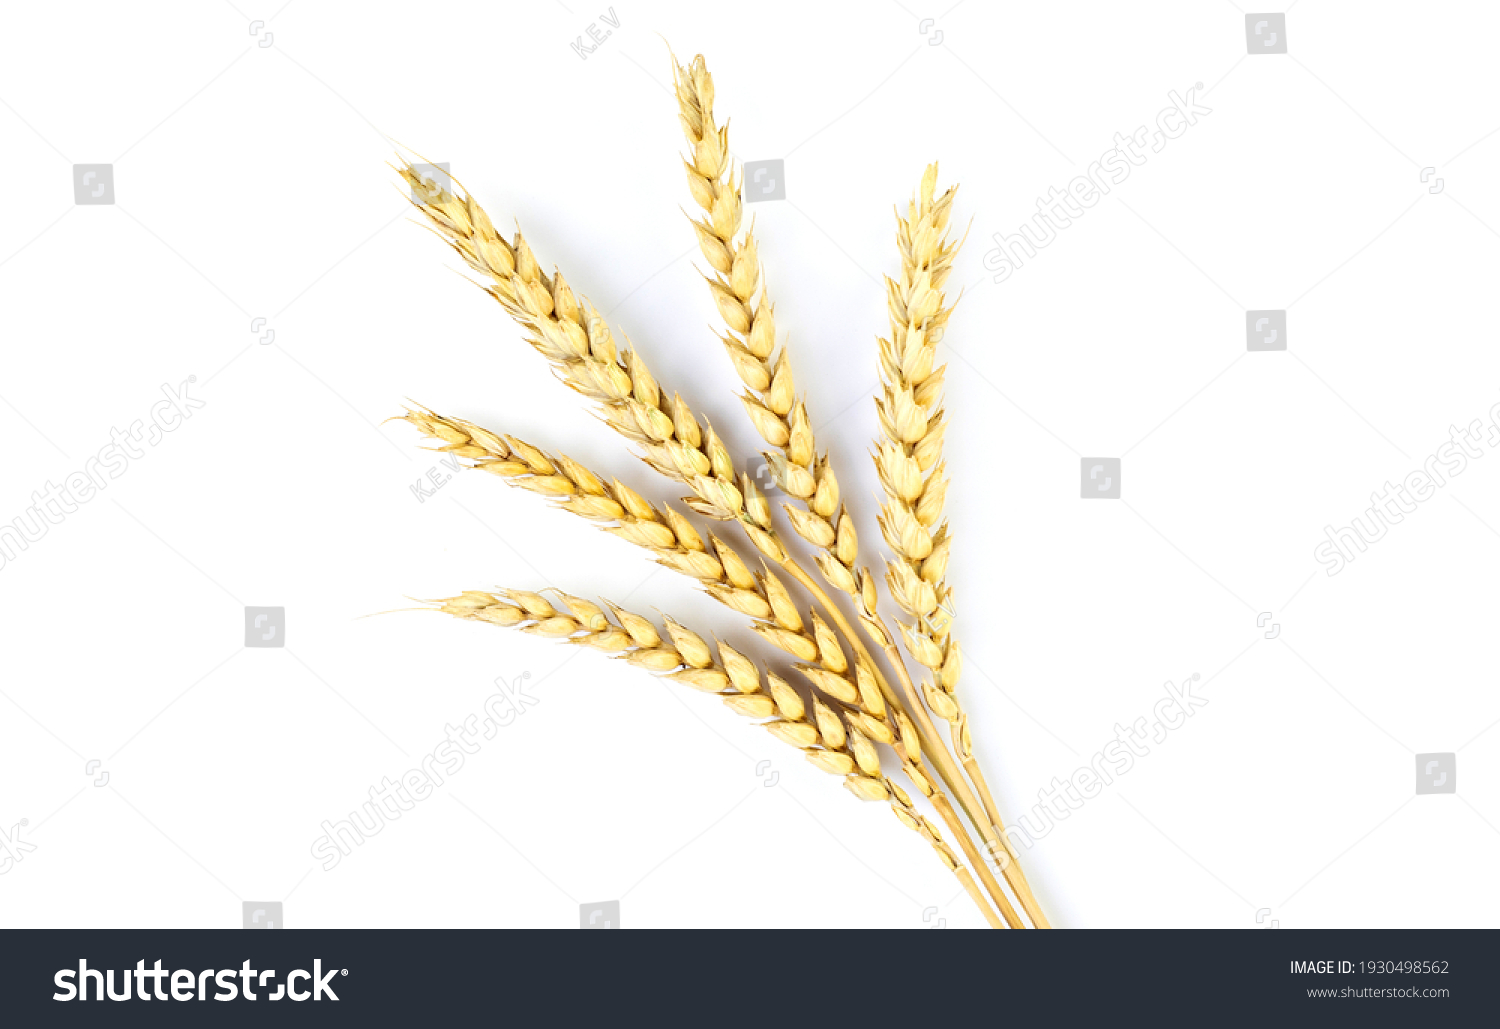 Golden wheat on a white background. Close up of ripe ears of wheat. #1930498562